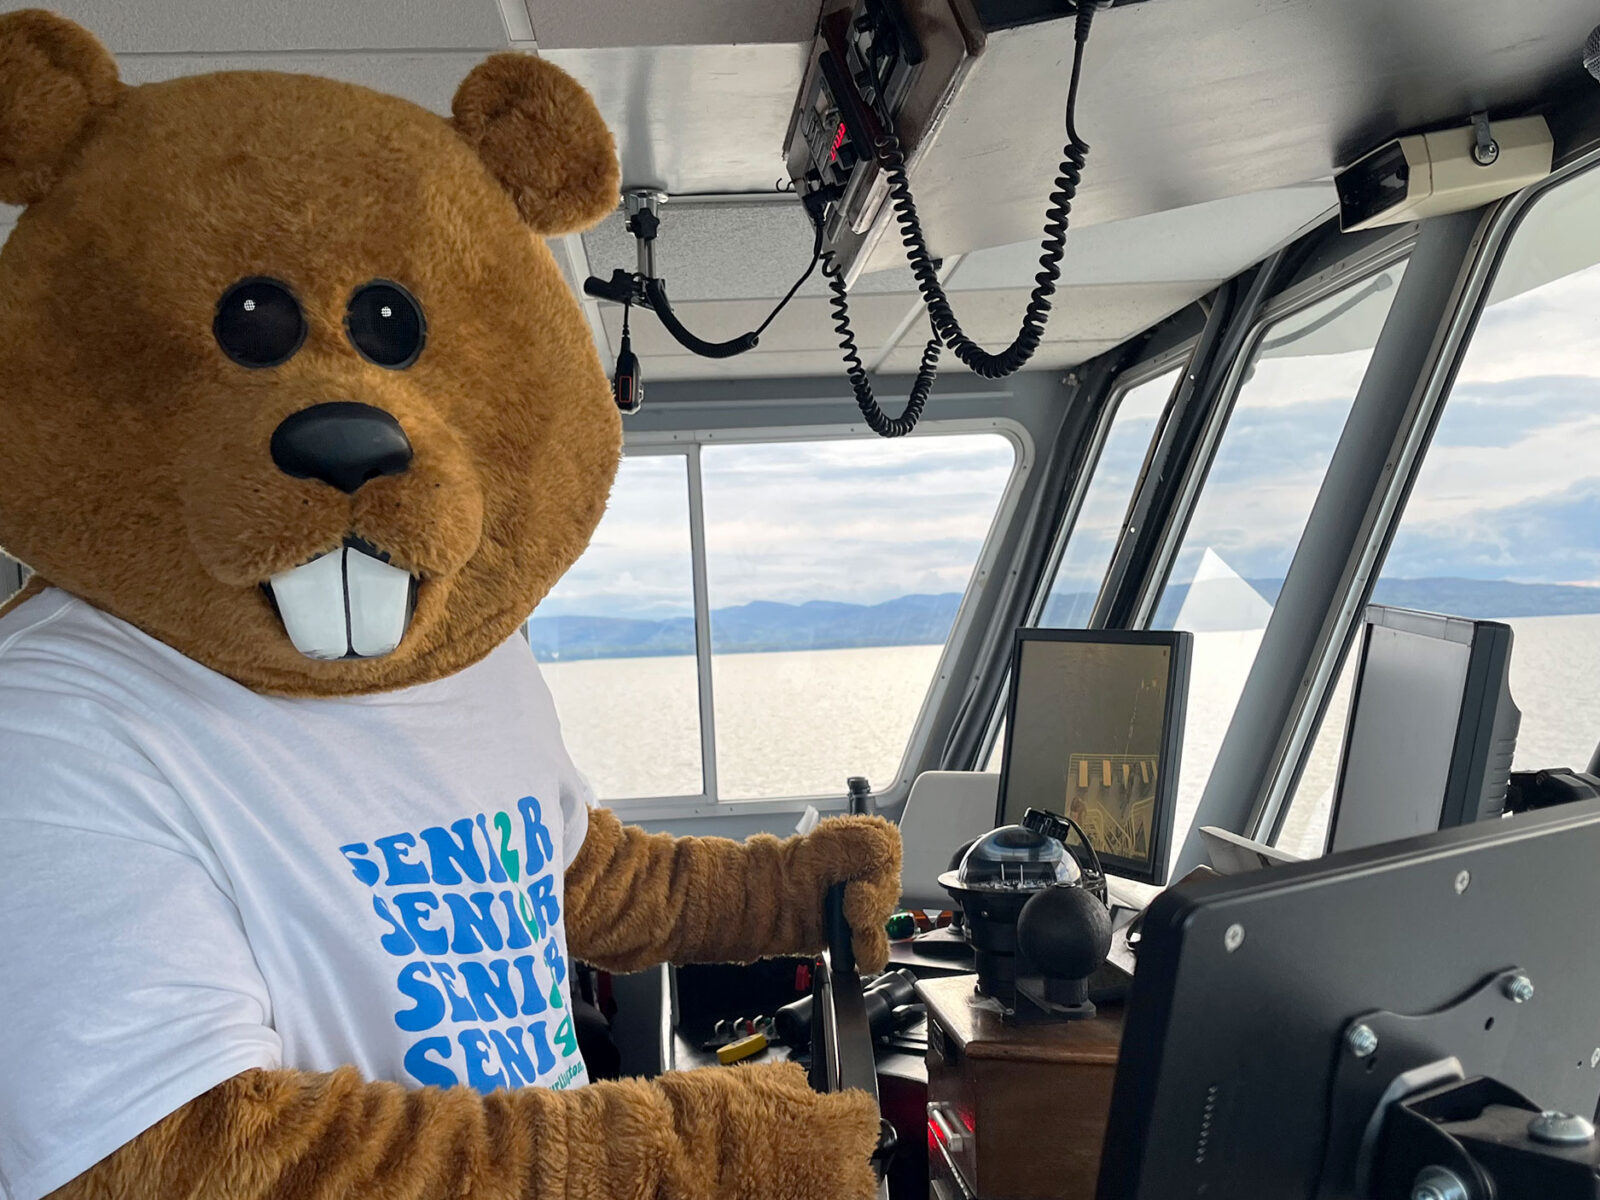 mascot chauncey t. beaver captains the ethan allen boat cruise with a lake and mountain view through the boat window